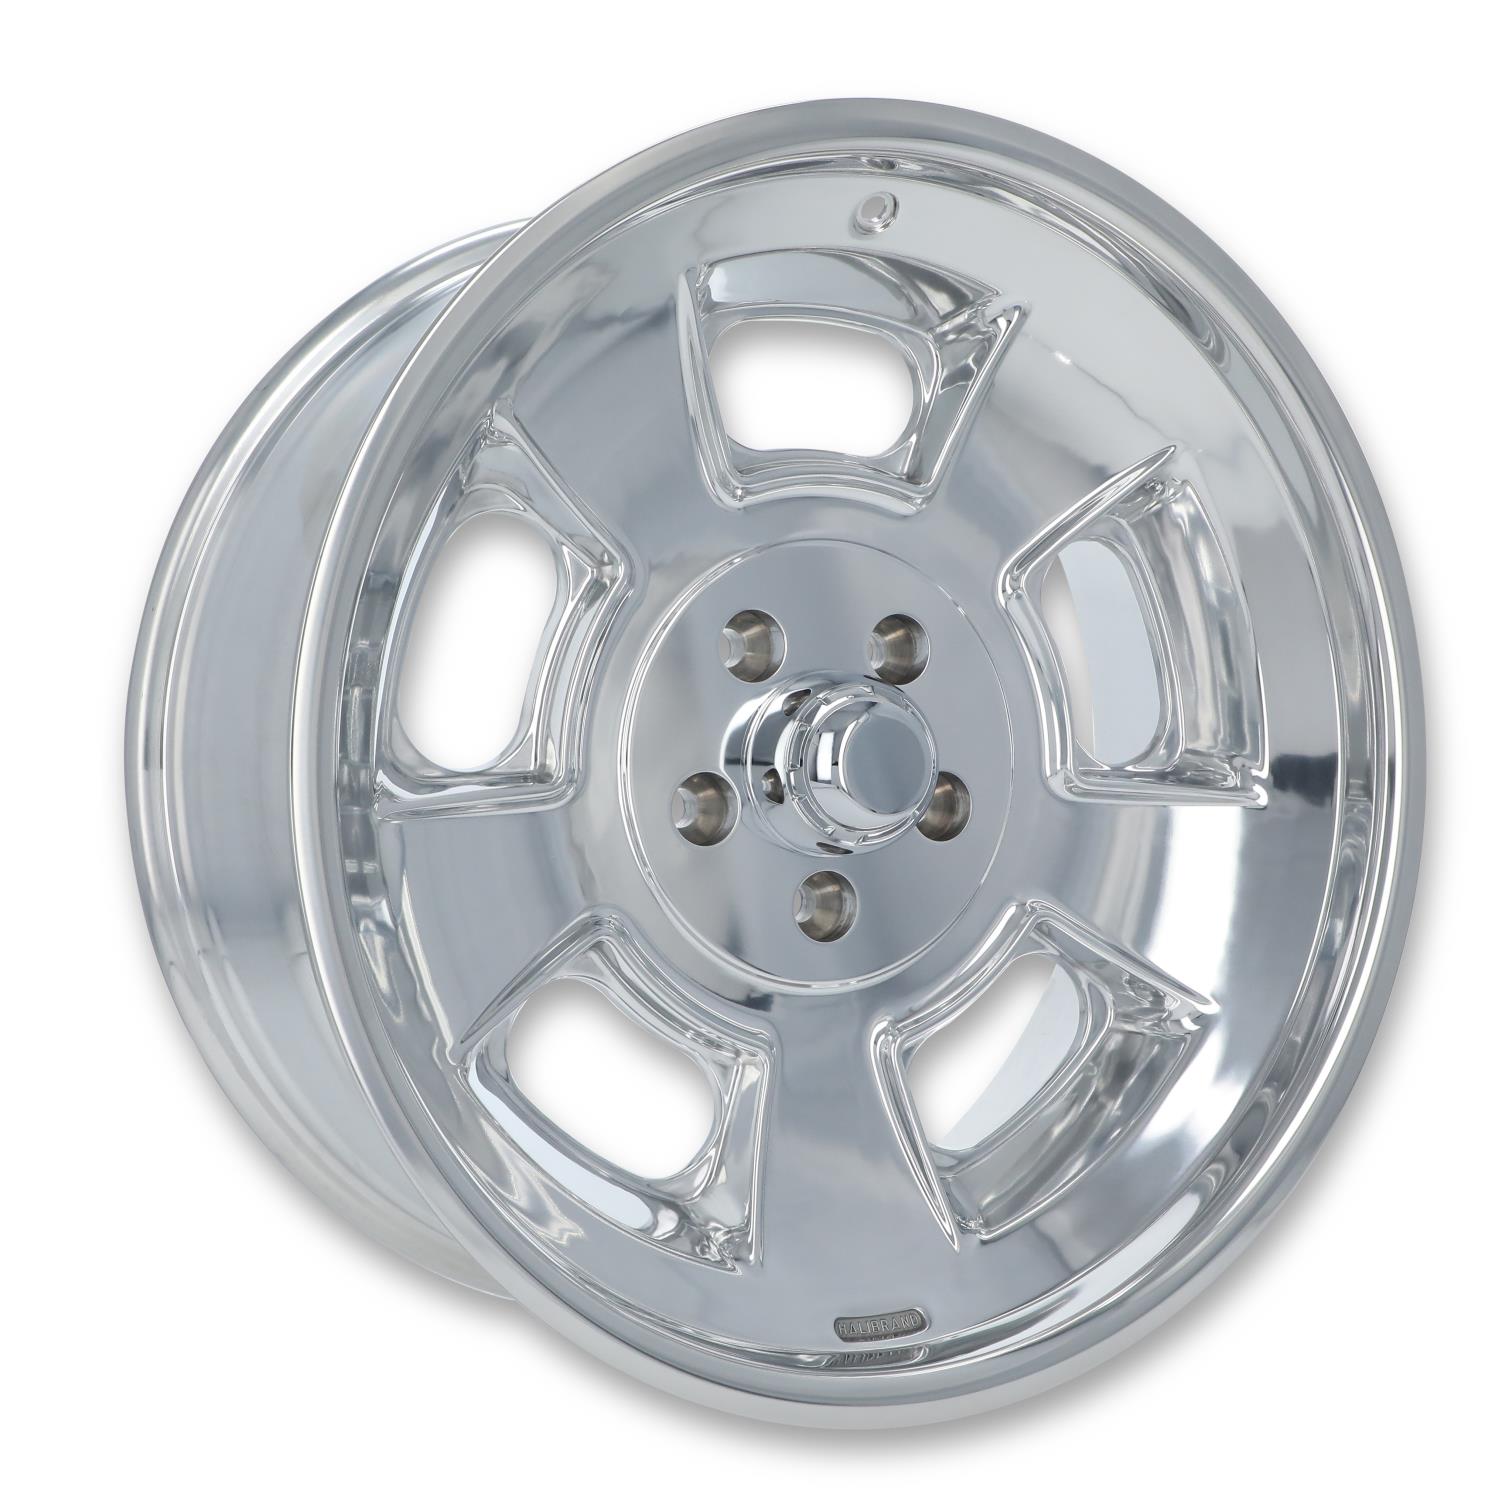 Sprint Front Wheel, Size: 20x8.5", Bolt Pattern: 5x5", Backspace: 4.5" [Polished - No Clearcoat]